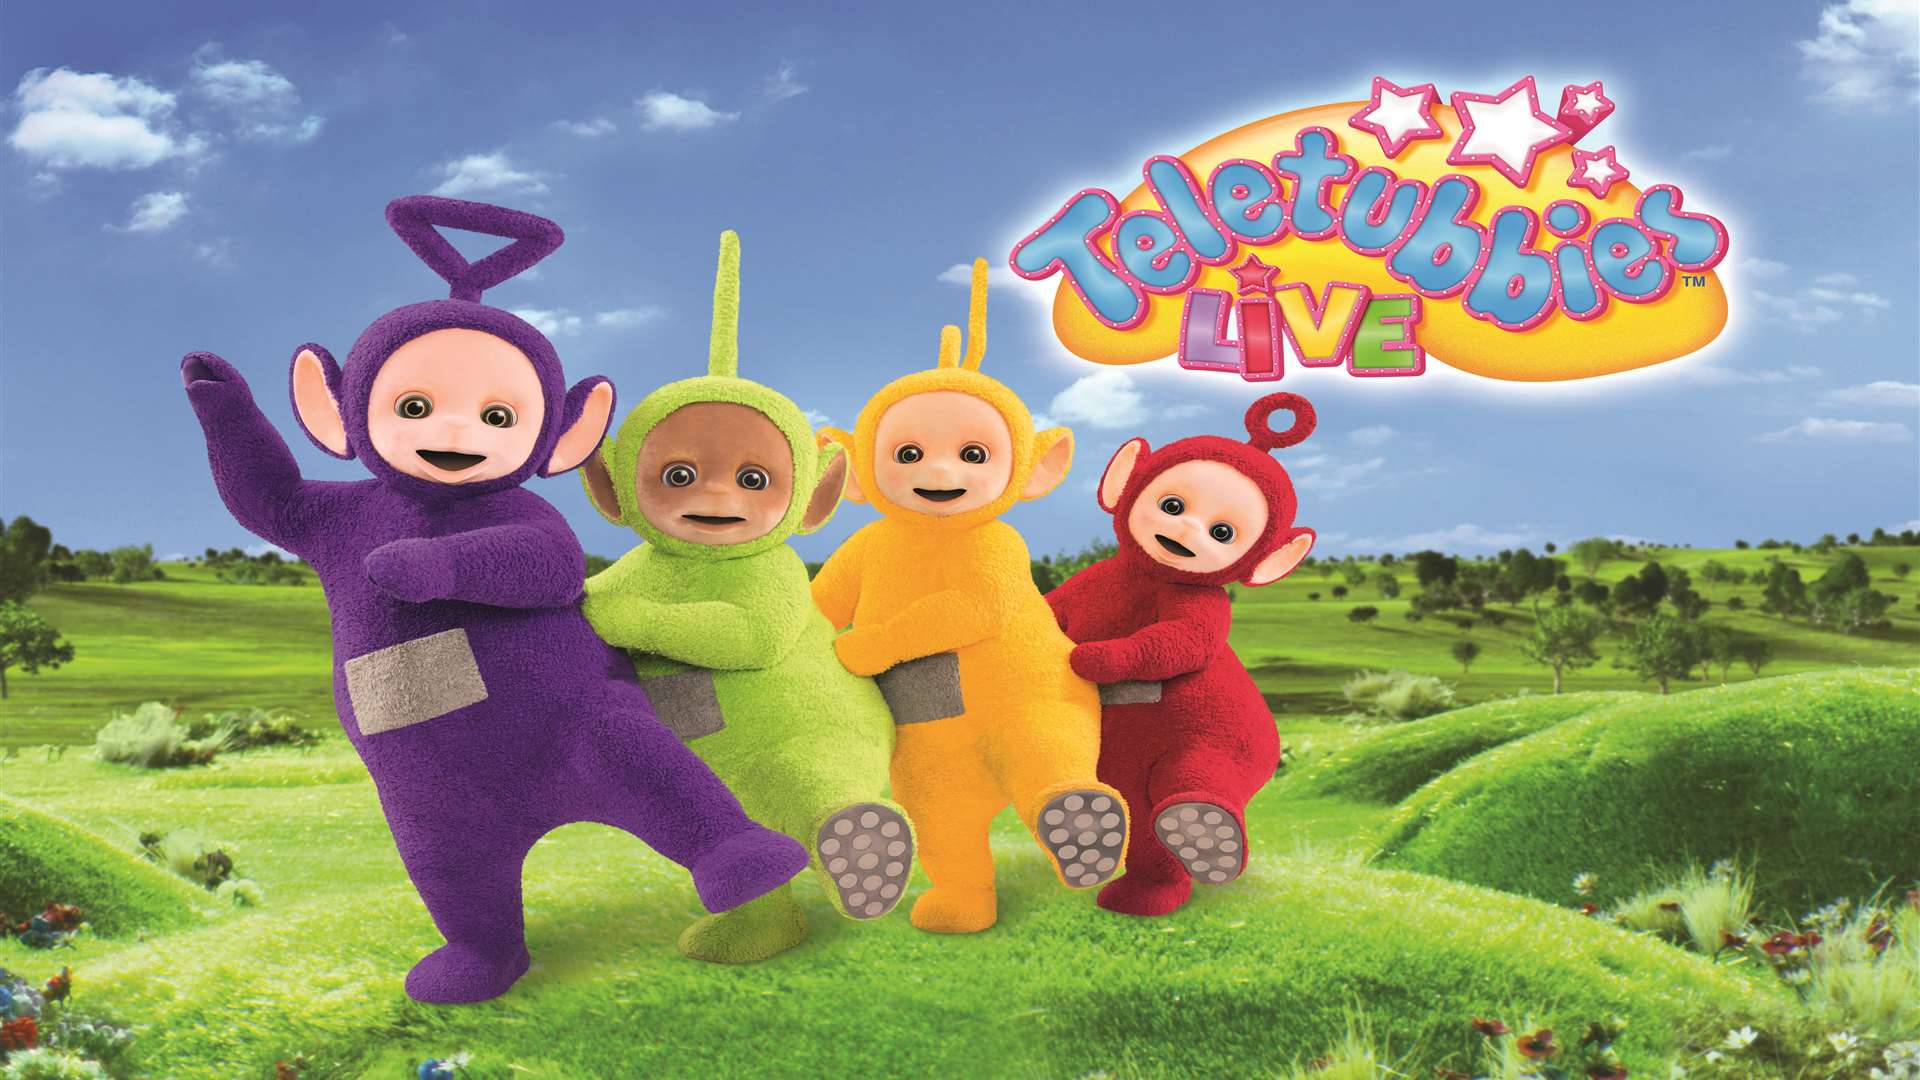 The Teletubbies are embarking on their first theatre tour